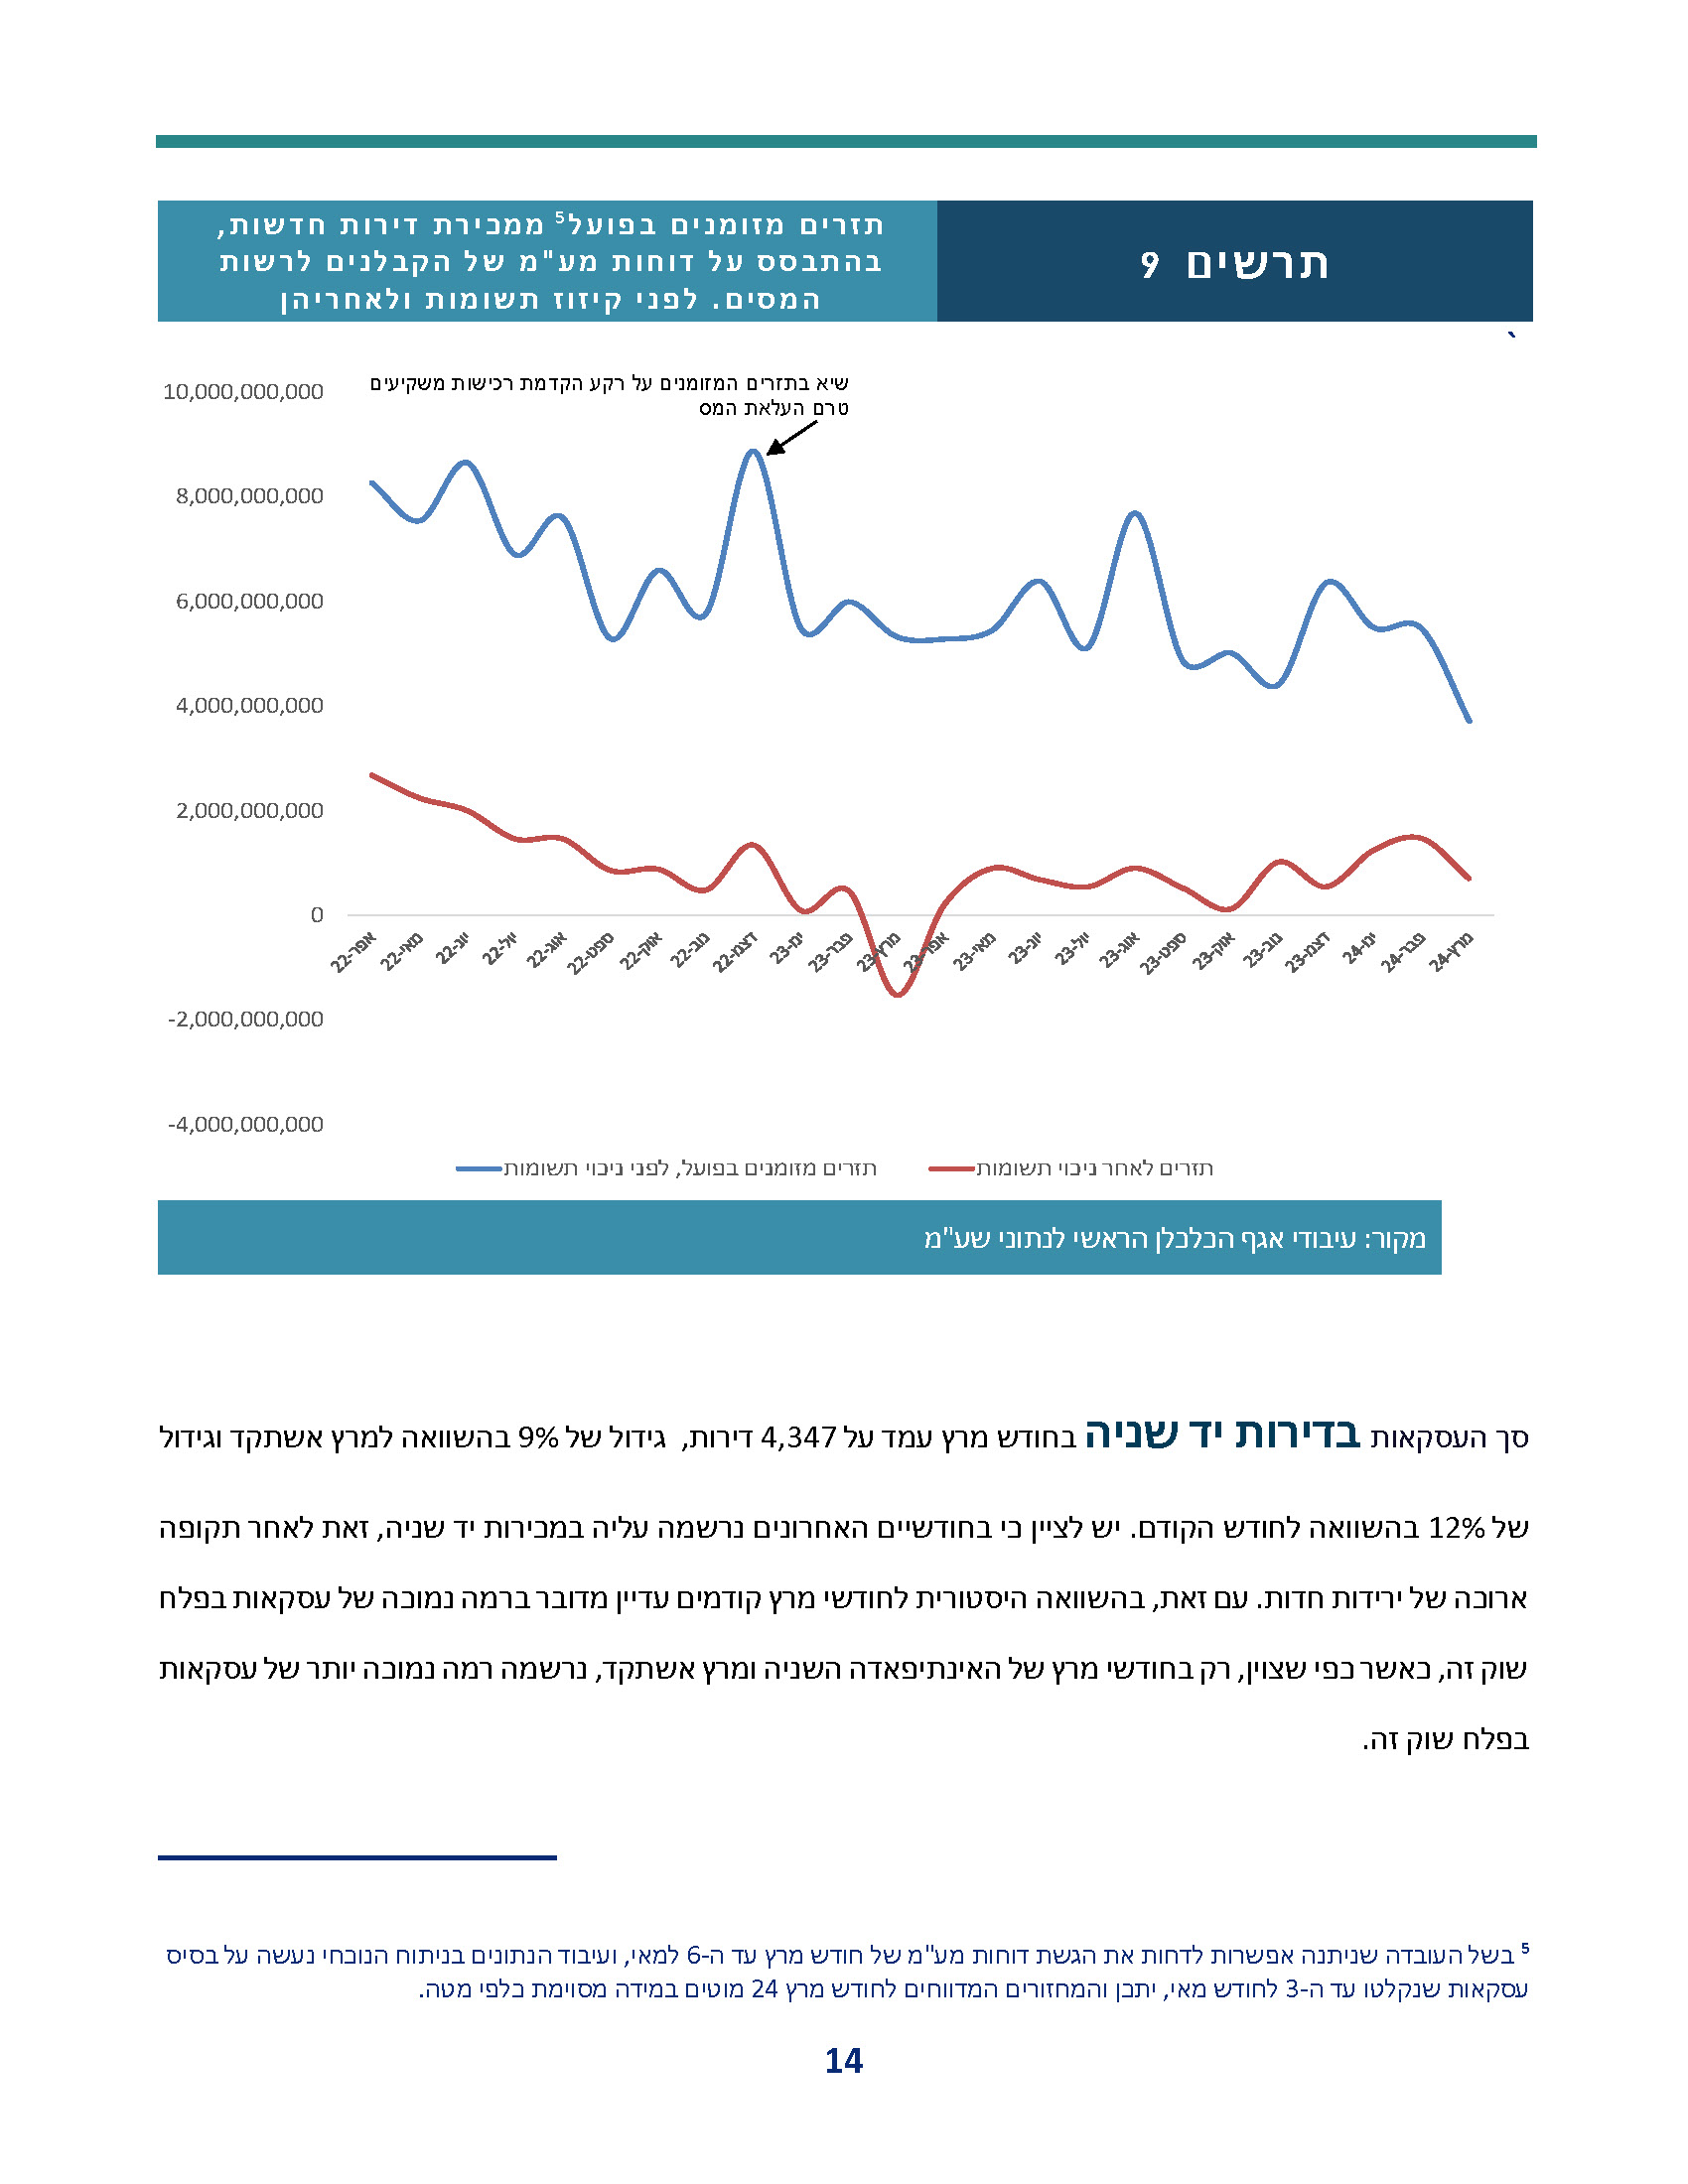 weekly_economic_review_periodic-review-real-estate-032024_Page_14.jpg